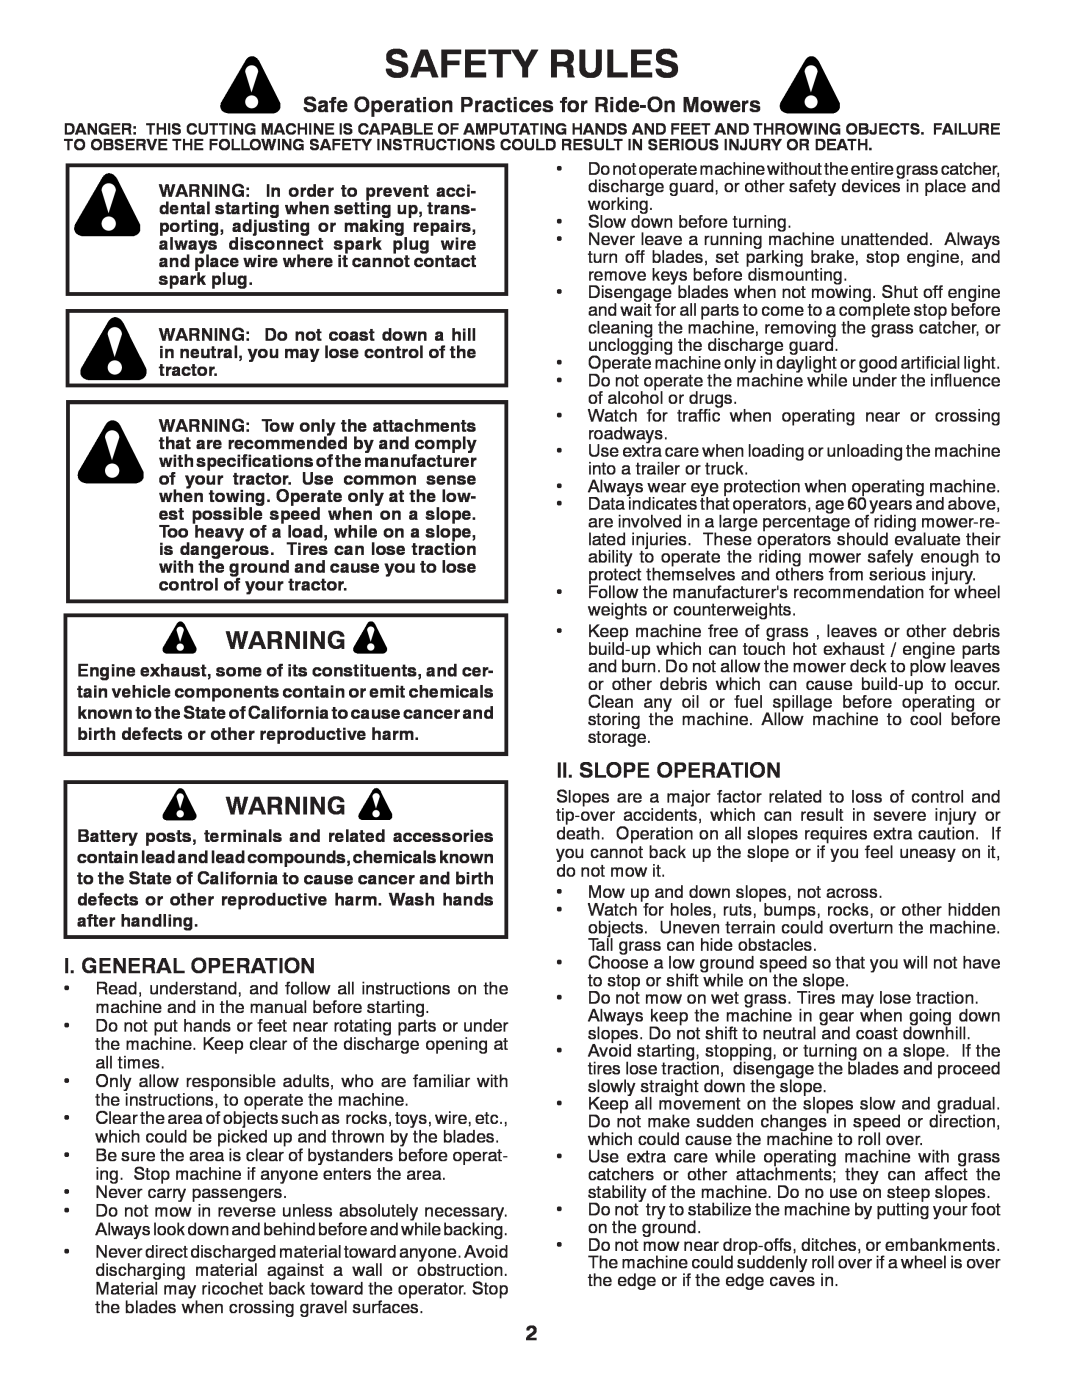 Poulan 419450 manual Safety Rules, Safe Operation Practices for Ride-On Mowers, I. General Operation, Ii. Slope Operation 